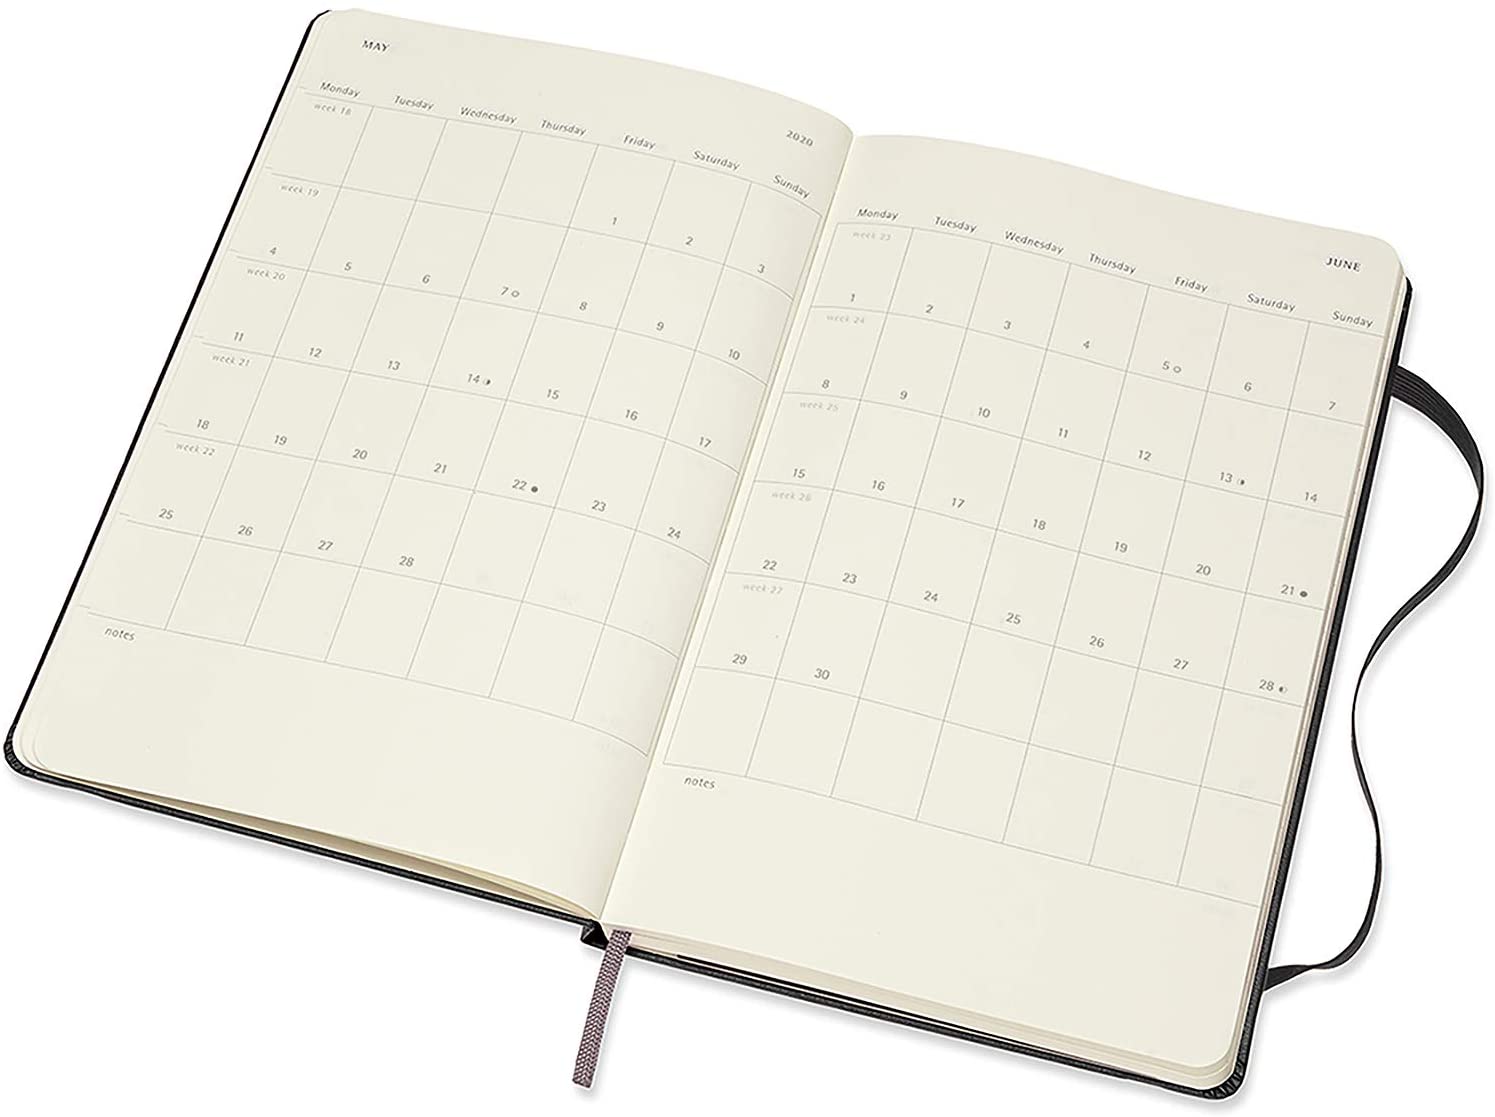 Moleskine - 12 Months Agenda Weekly Horizontal 2020  -  Hard Cover and Elastic Closure - Black Color - Large 13 x 21 cm - 144 Pages